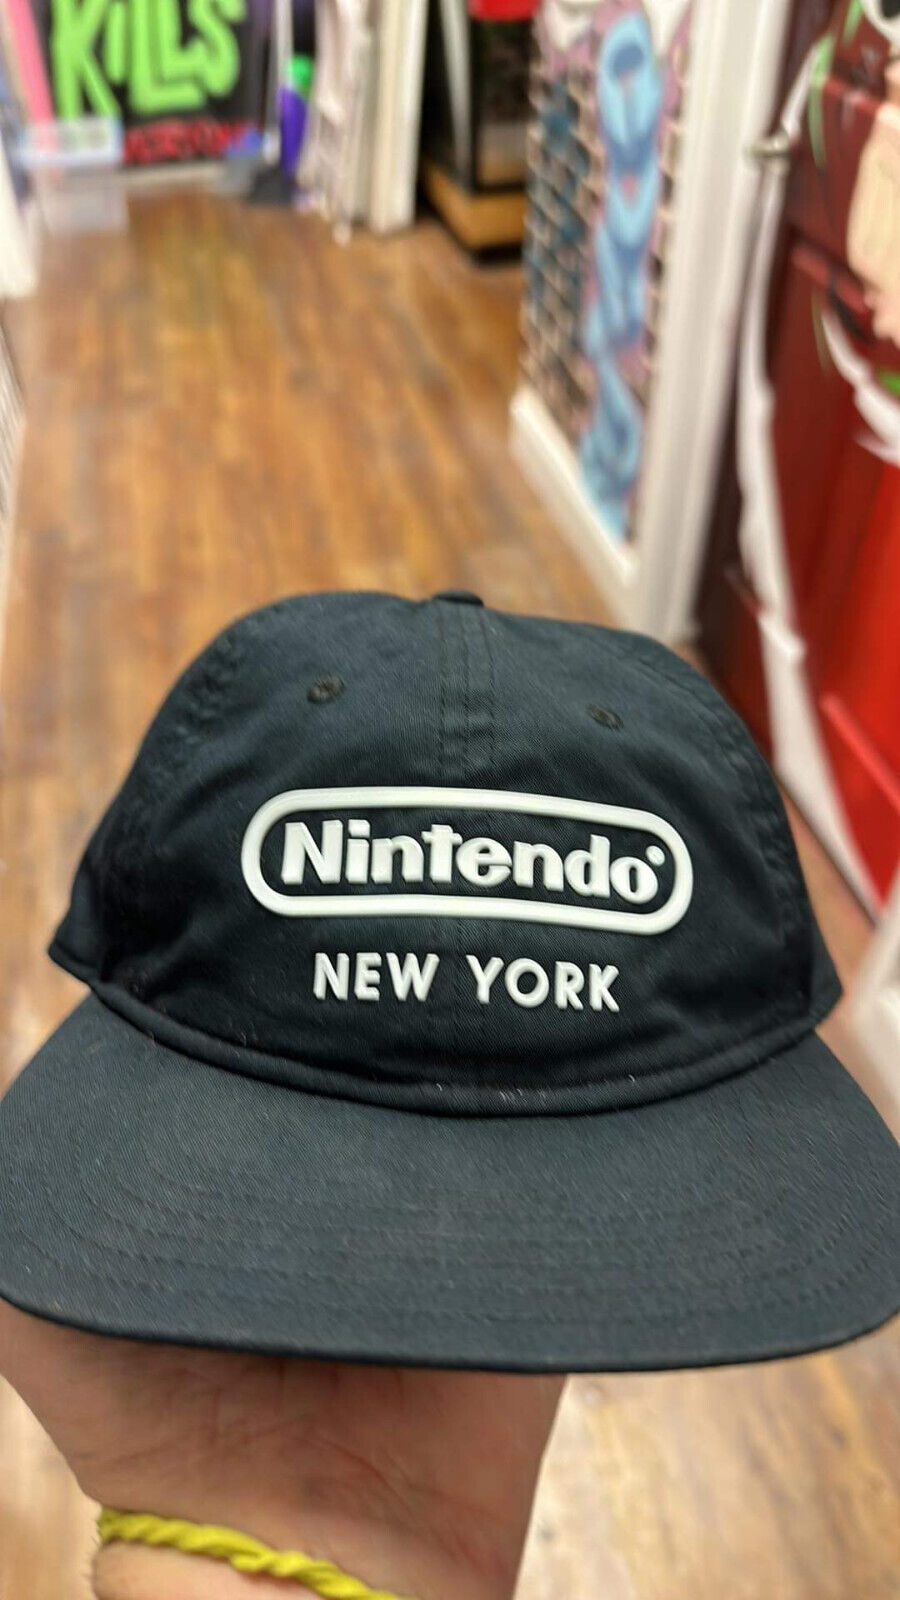 Nintendo World NYC NY Exclusive New York Limited Logo Official Hat Cap - Black